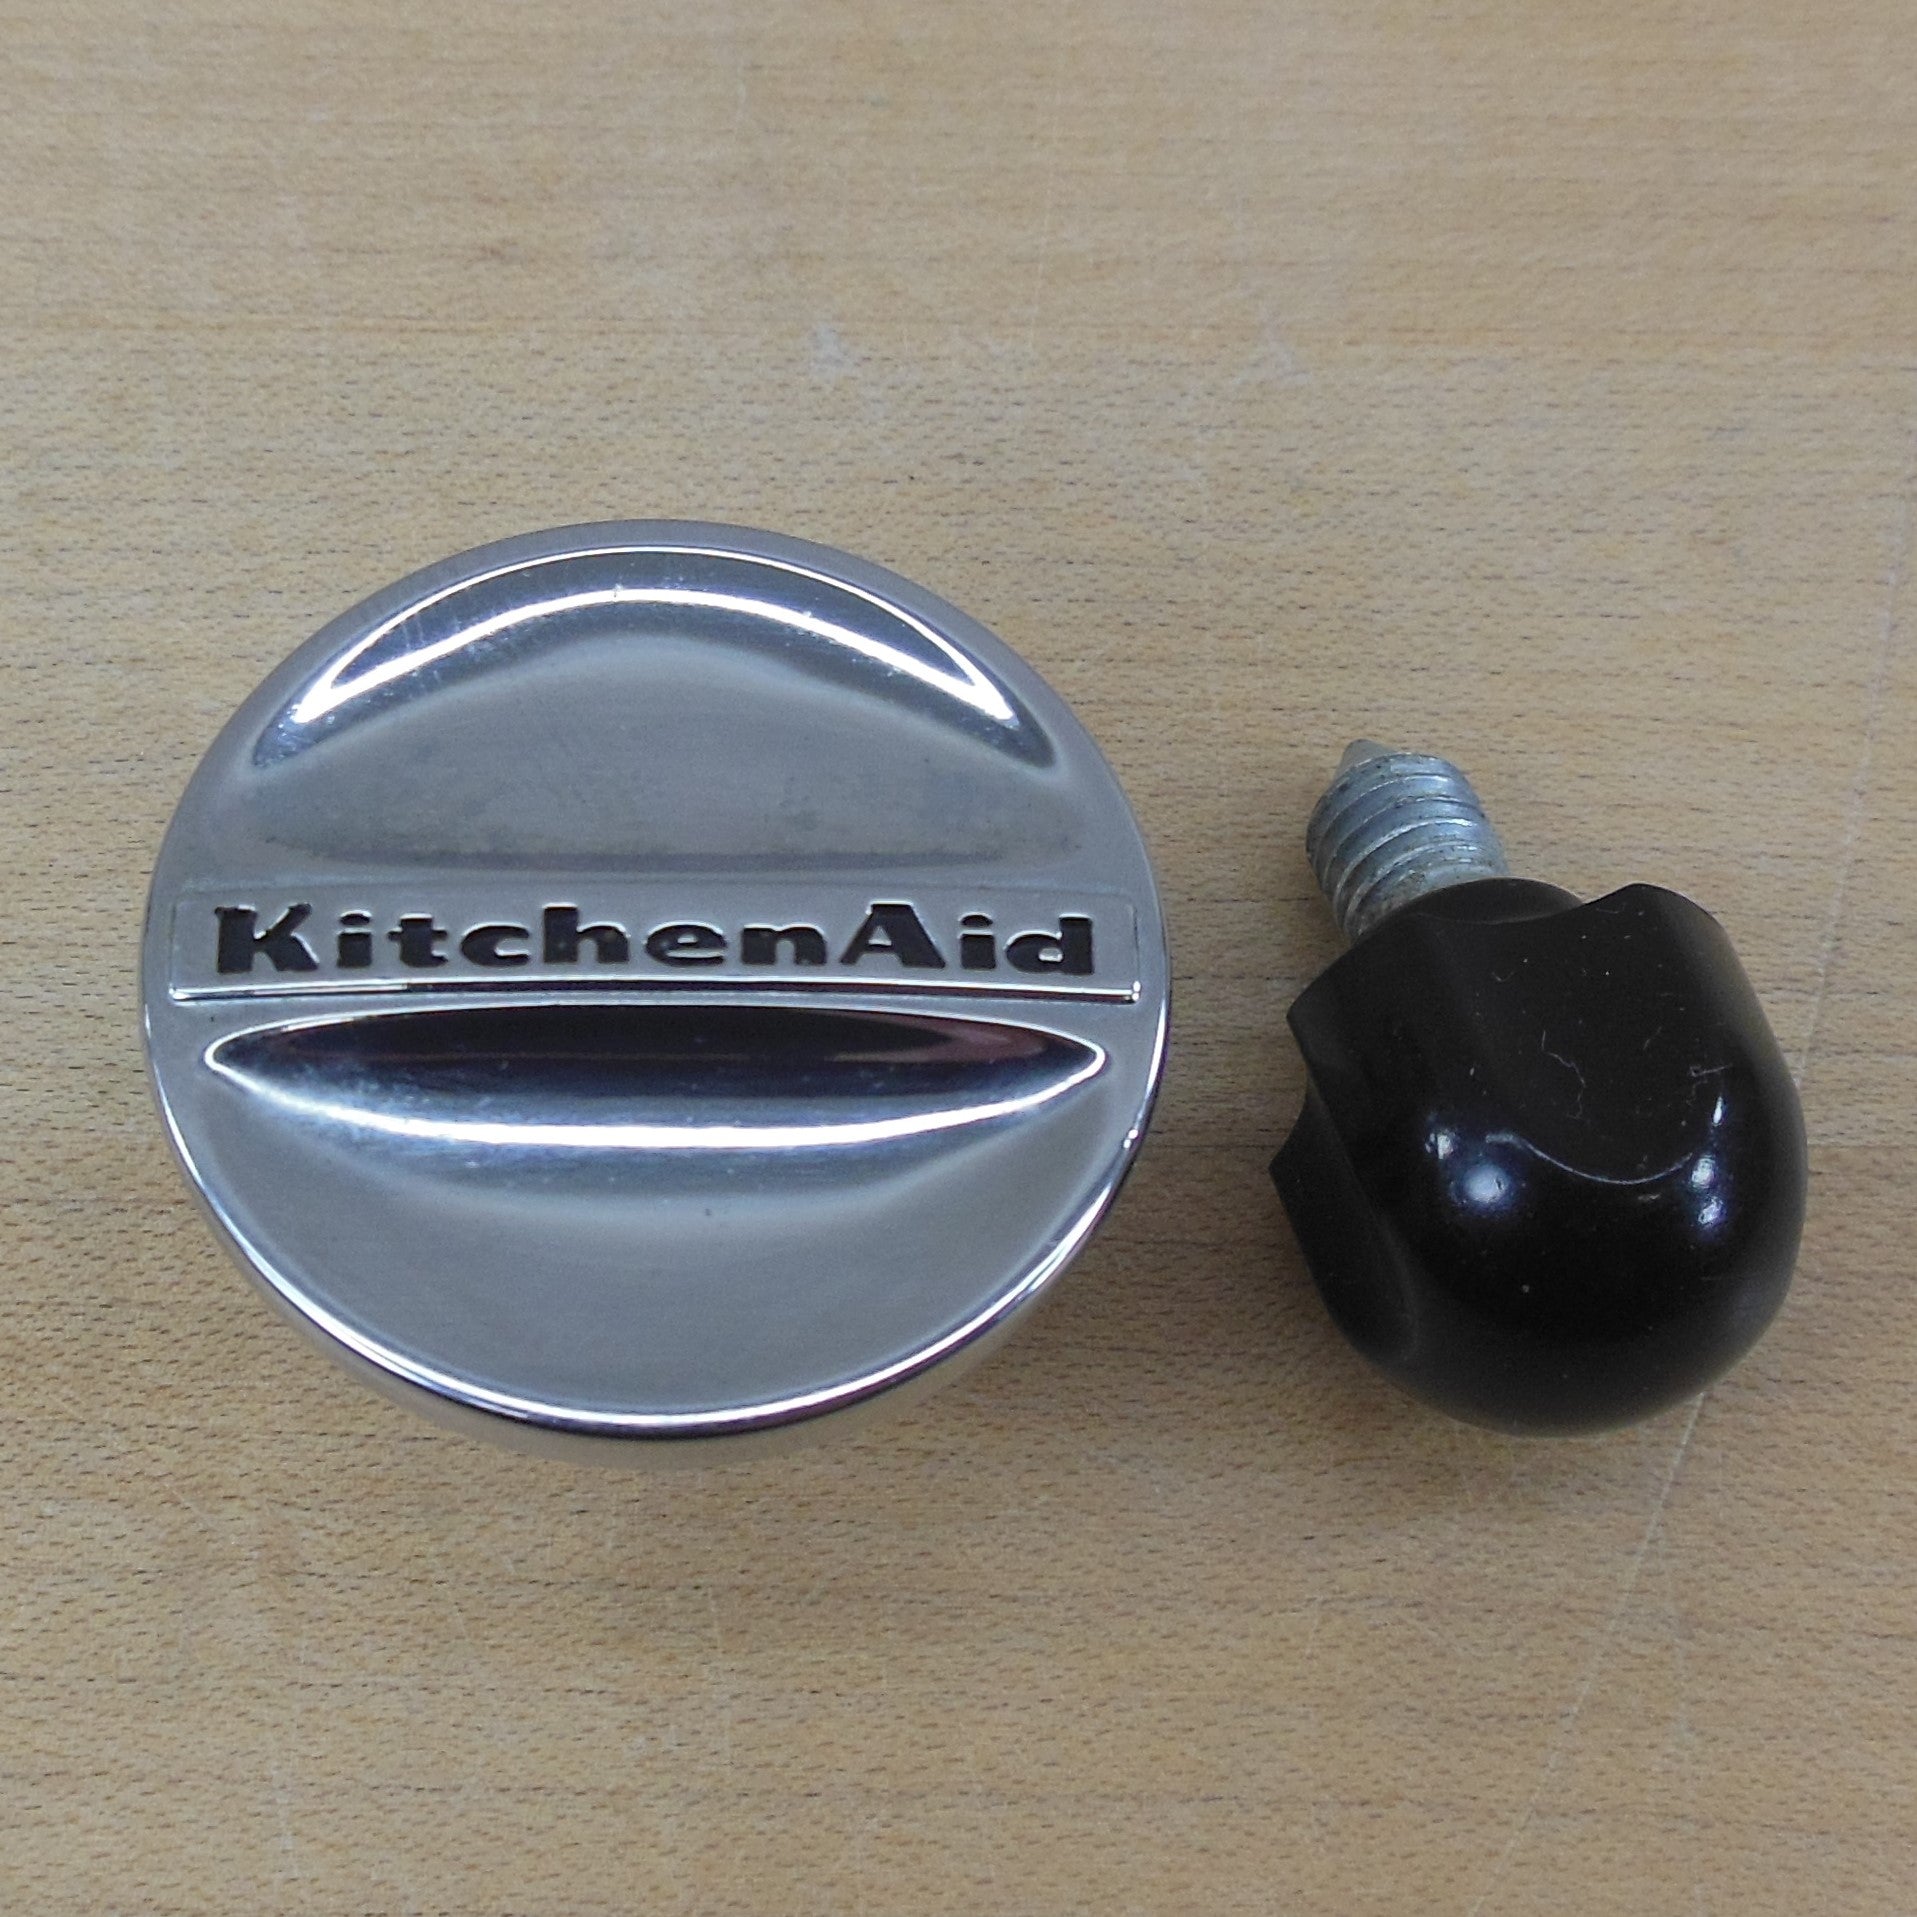 Mixer Knob for Kitchenaid Replacement Parts,As Kitchenaid Mixer  Replacement,Mixer Screw Attachment for Kitchenaid Stand Mixer 2 Pcs